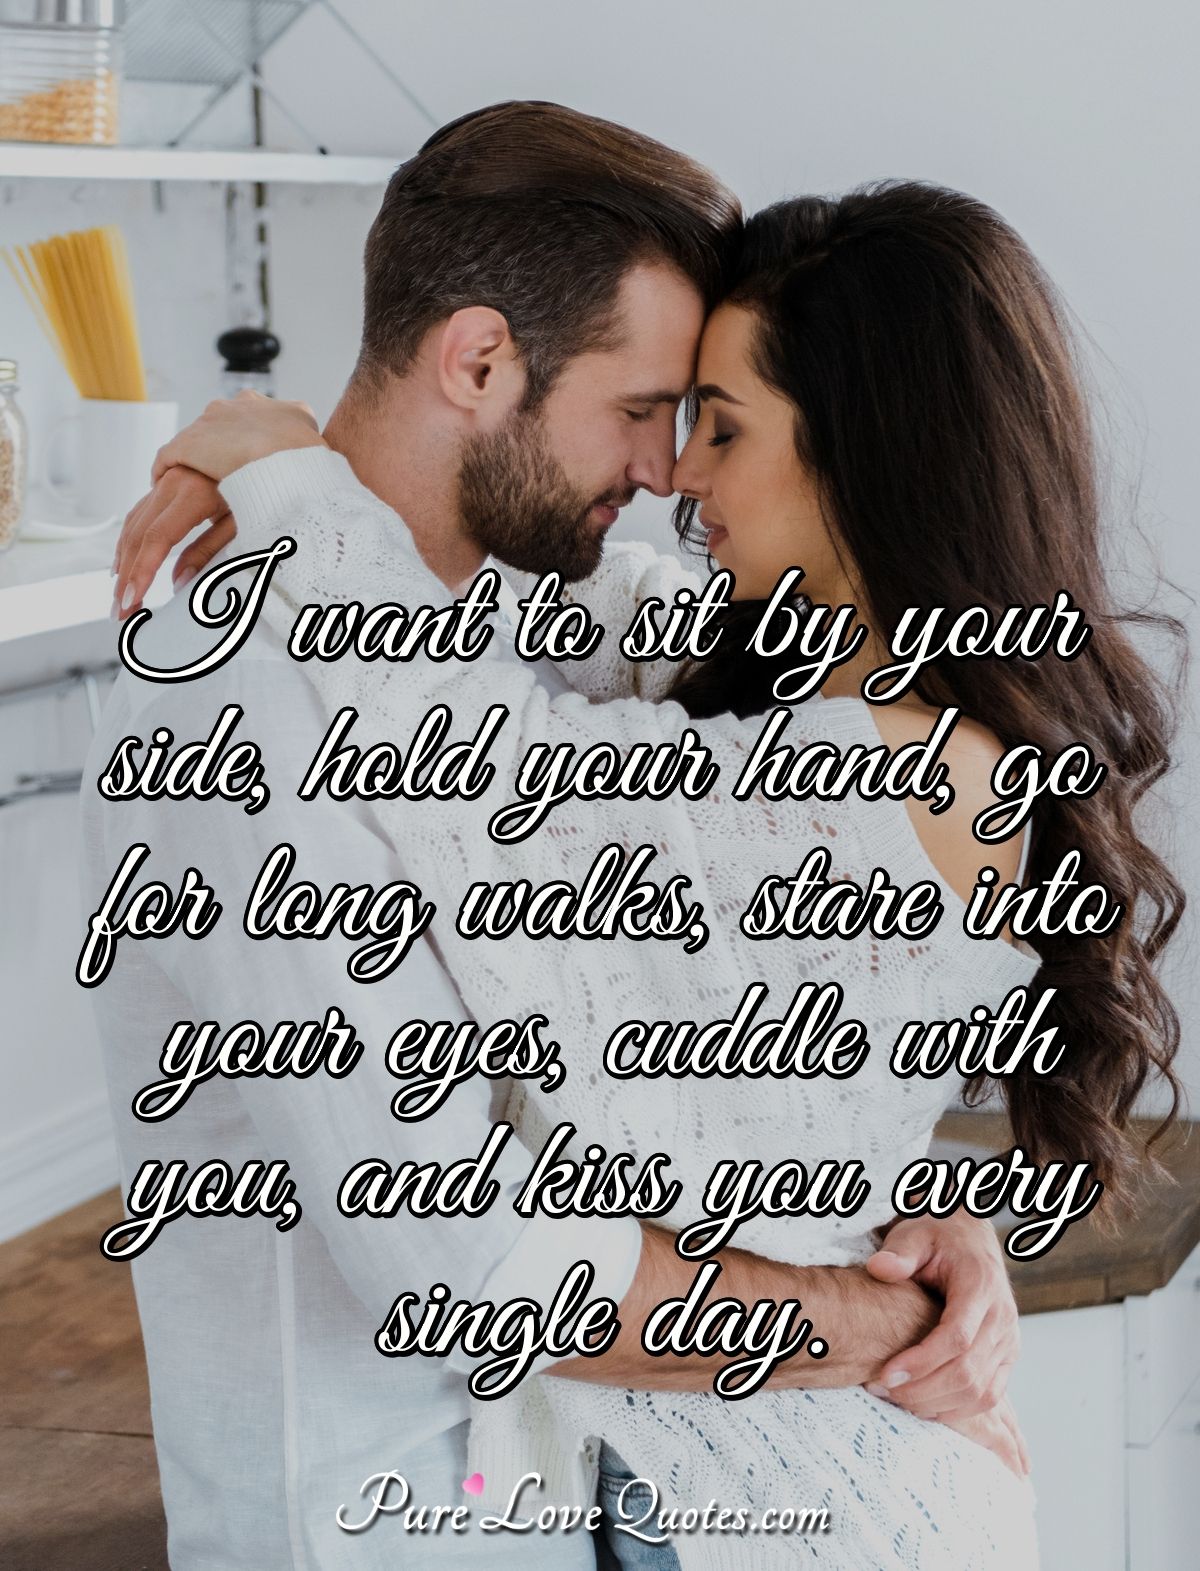 99 Holding Hands Quotes and Captions for Tender Moments